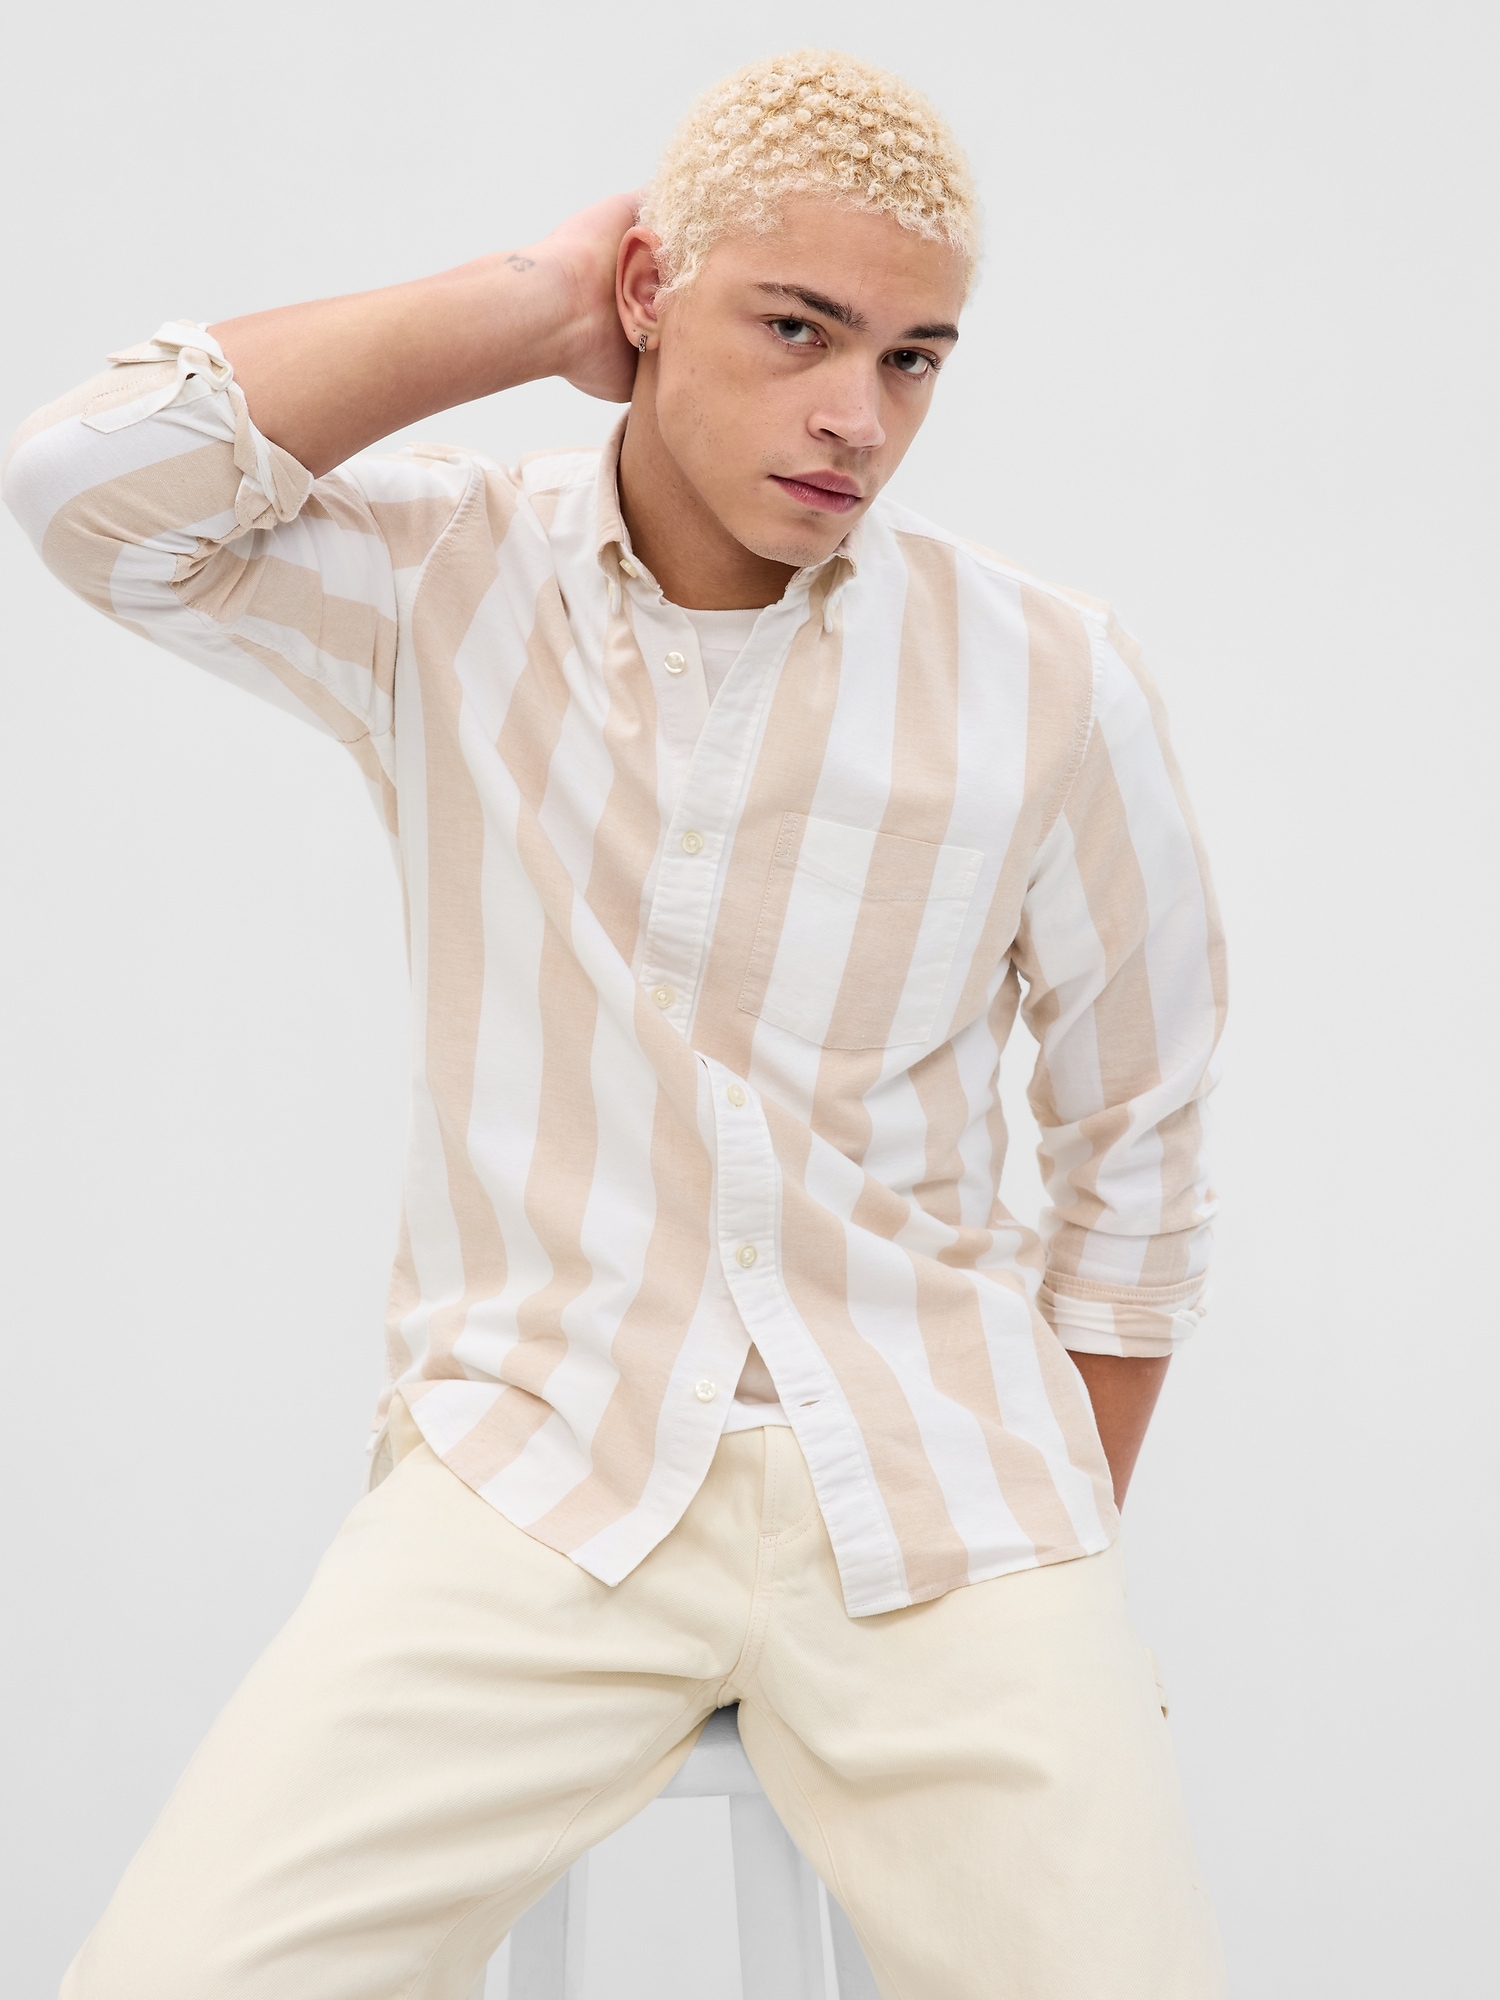 Gap Classic Oxford Shirt in Standard Fit with In-Conversion Cotton